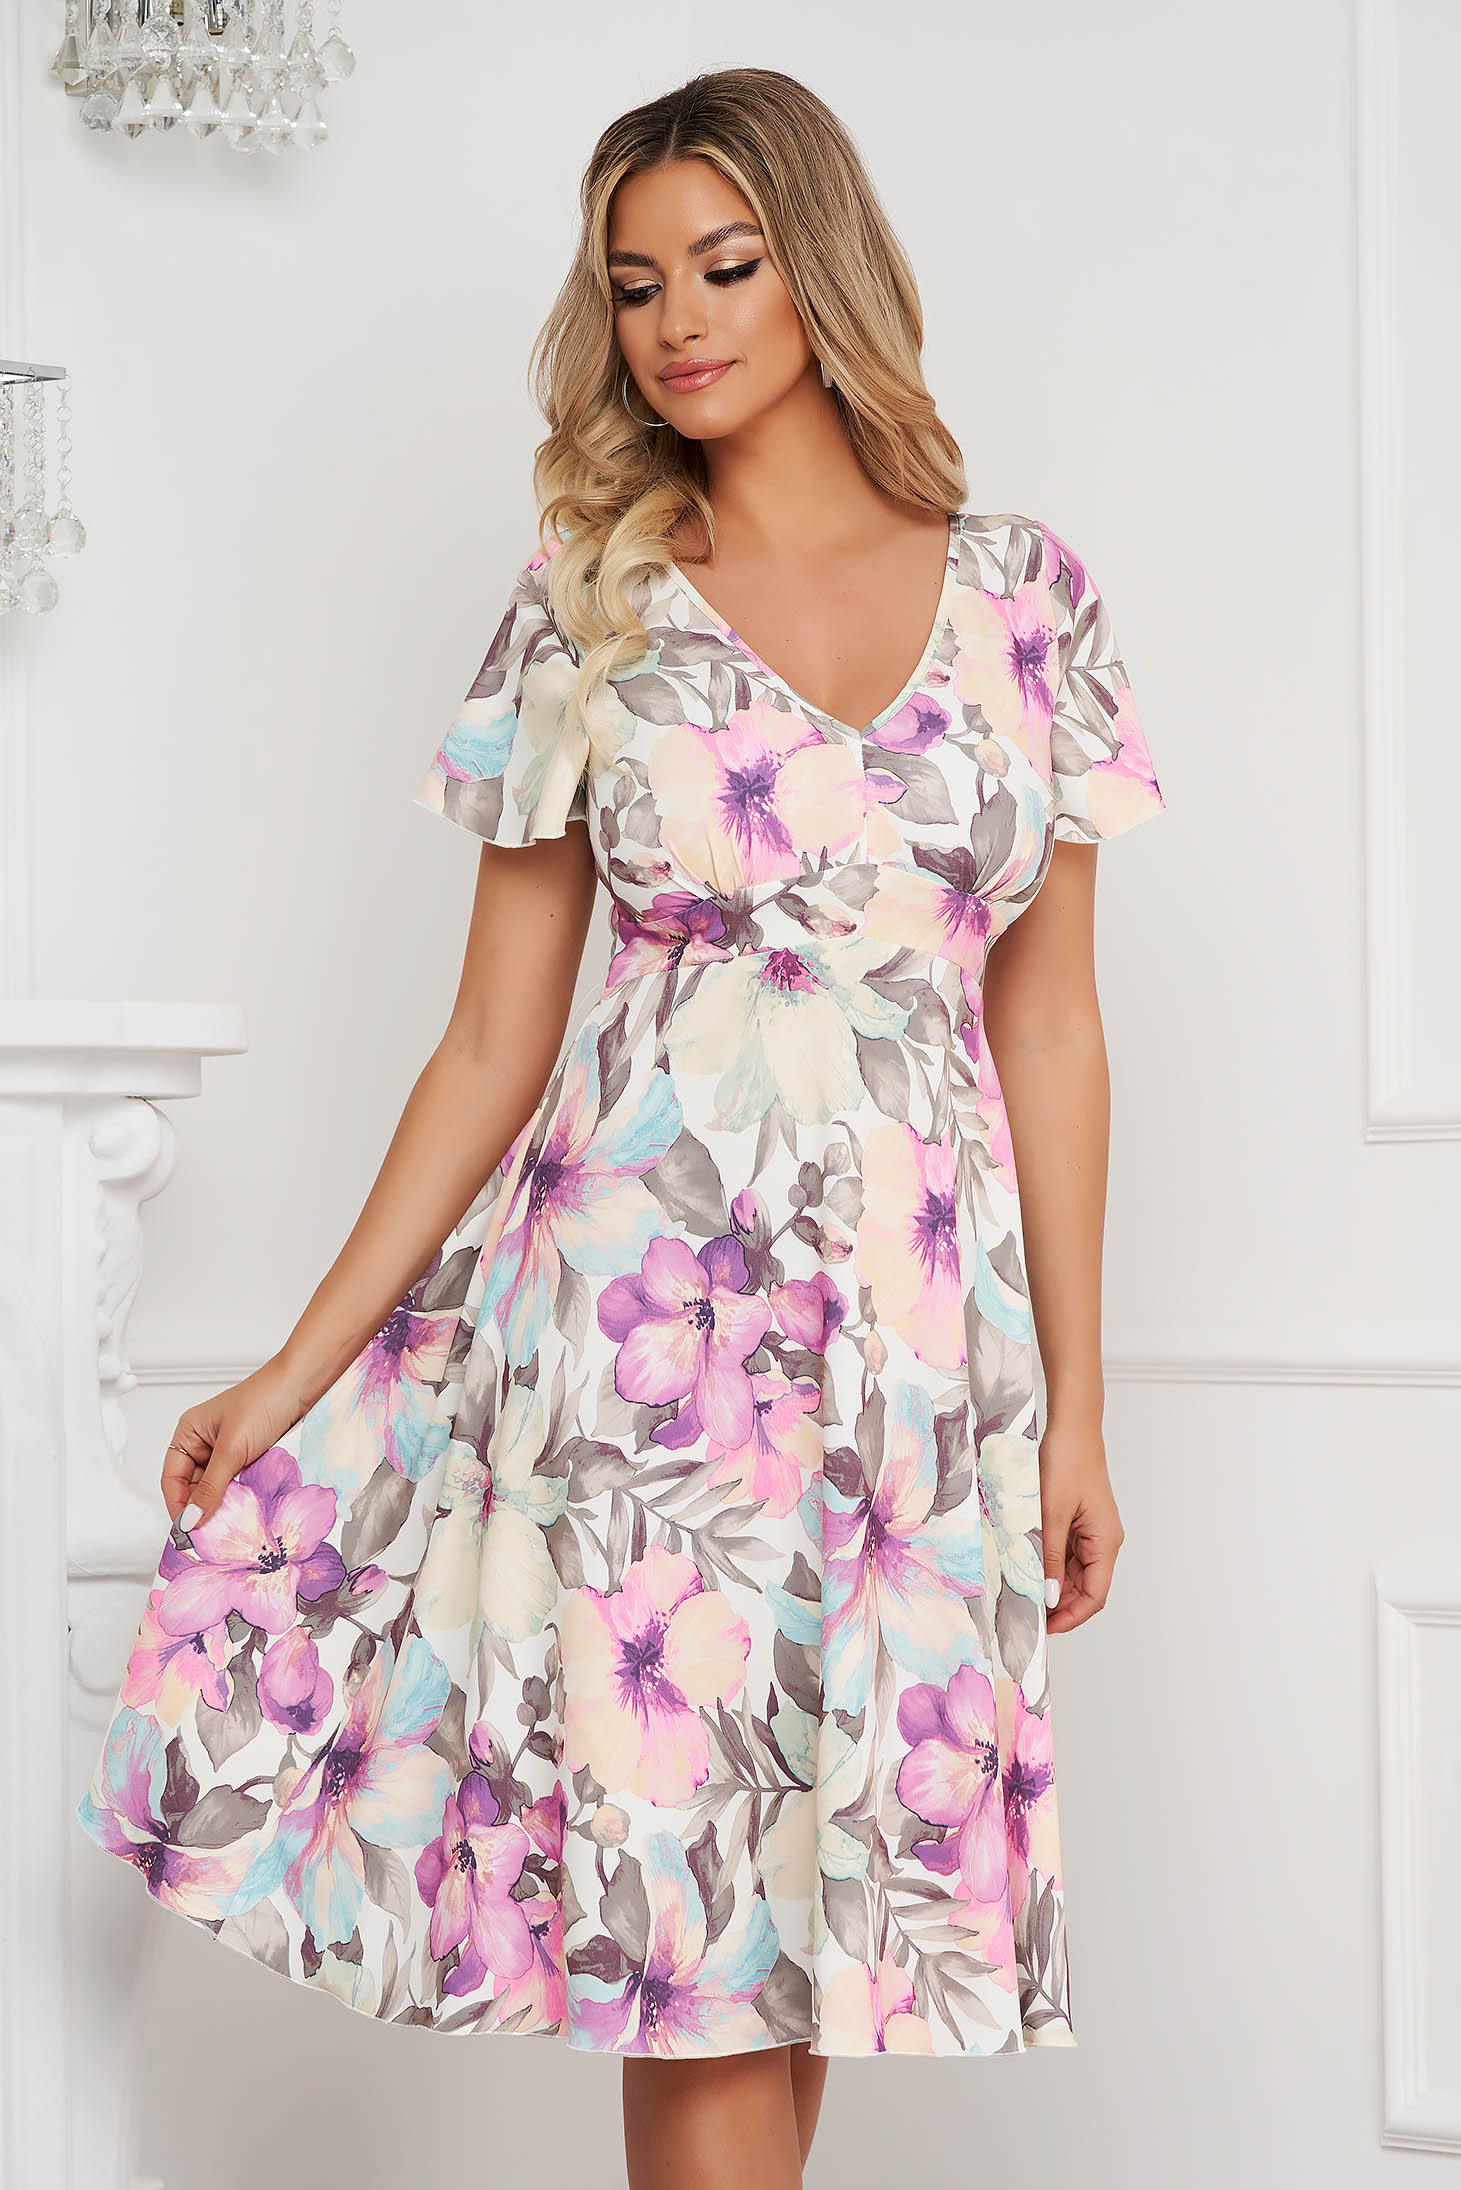 Dress midi cloche short sleeves with floral print thin fabric office